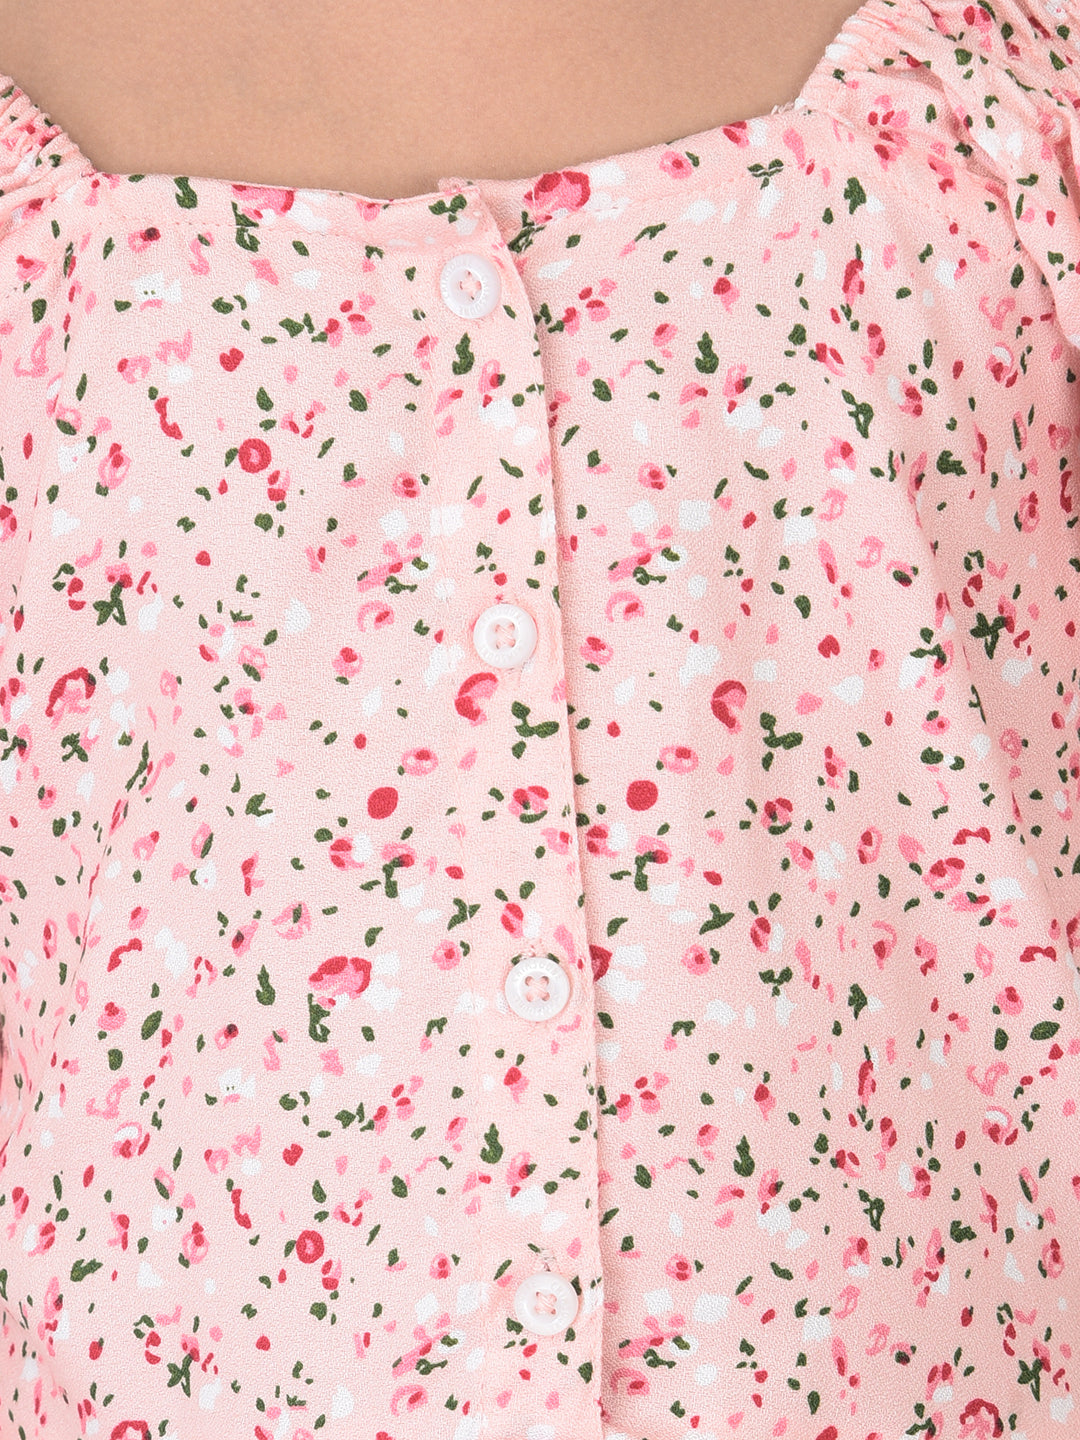 Pink Floral Printed Cinched Waist Top - Girls Tops